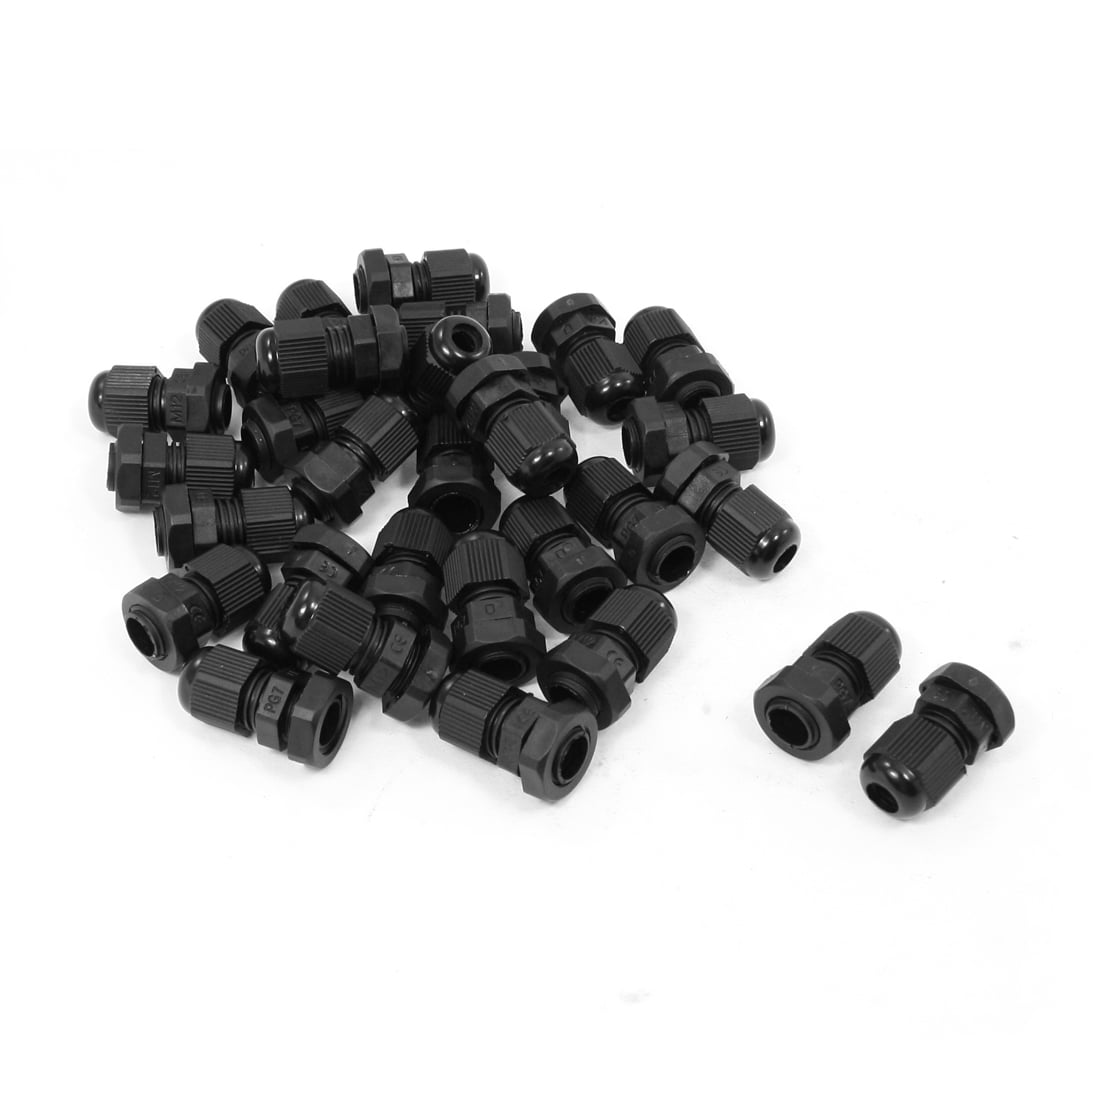 5PCS New  PG7 Black Plastic Waterproof Connector Gland 3-6.5mm Dia Cable 